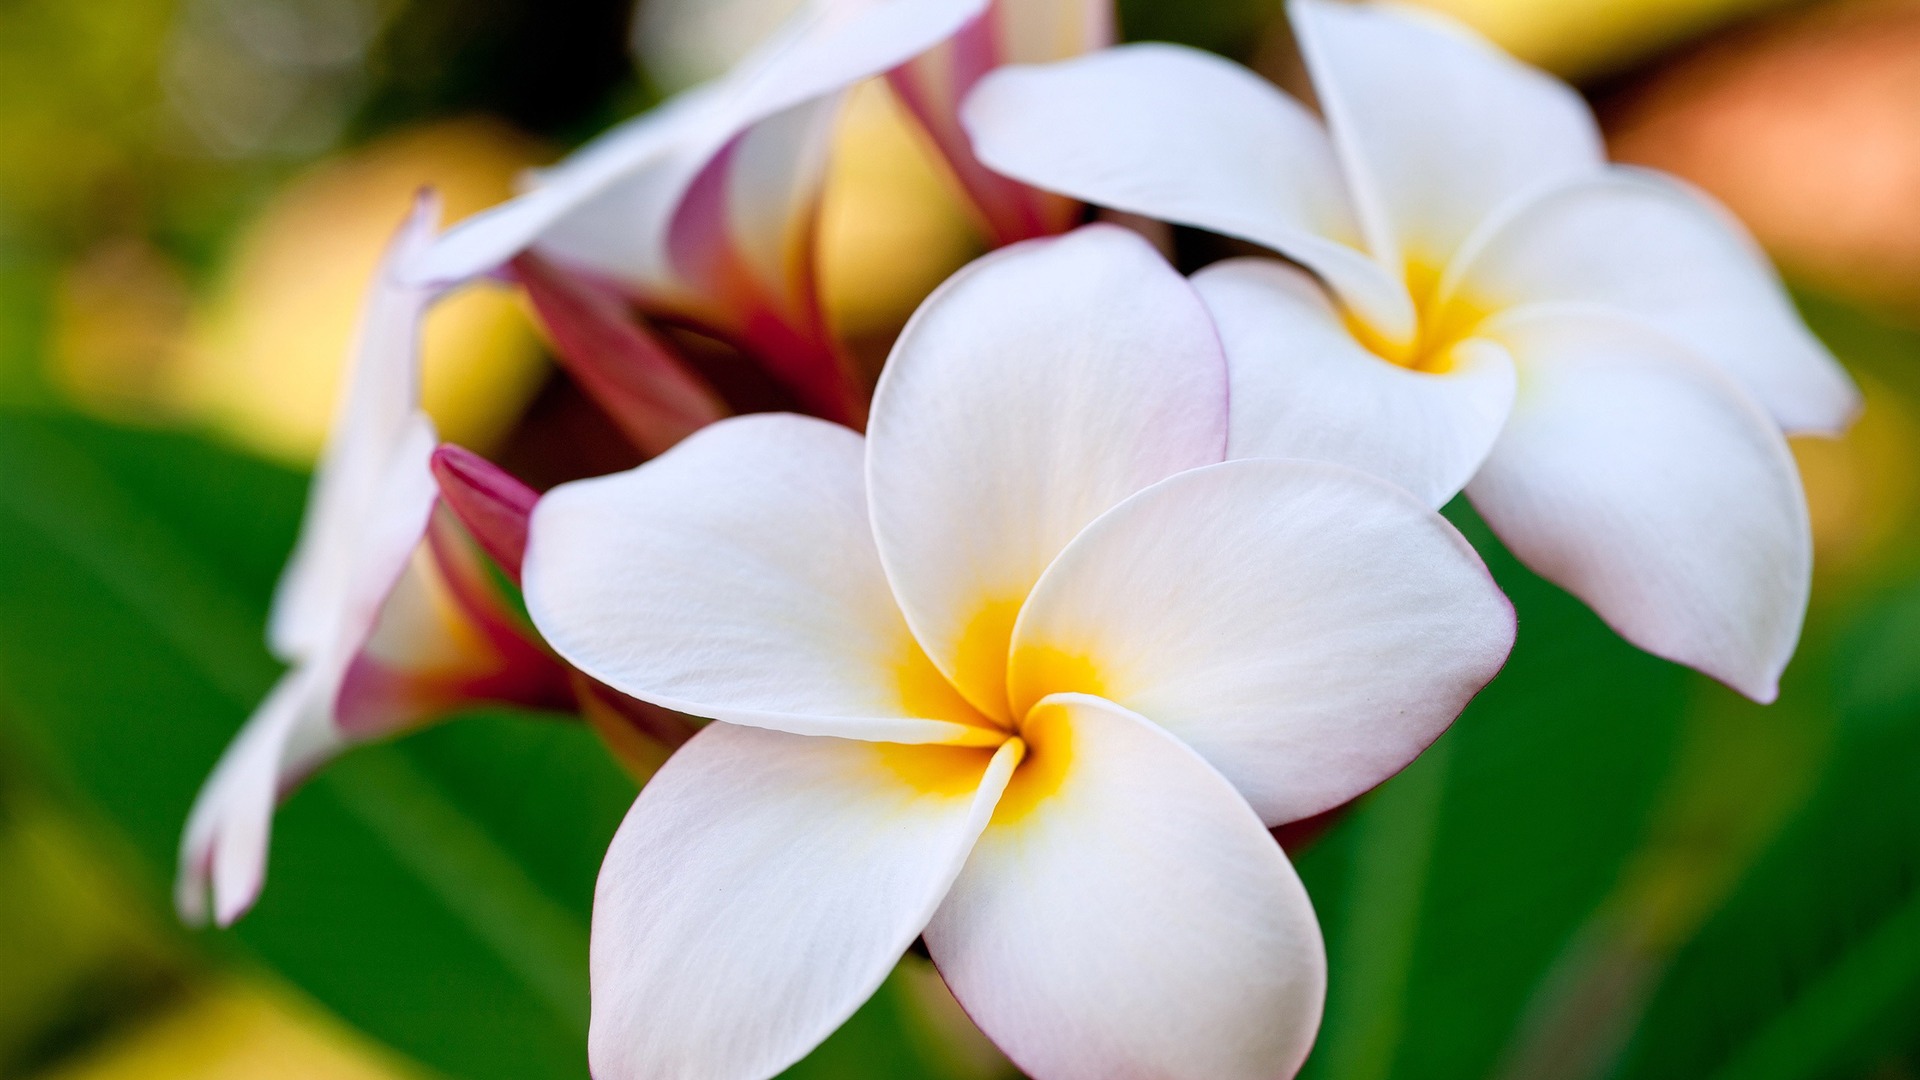 Hawaiian Flowers Pictures In High Definition Or Widescreen